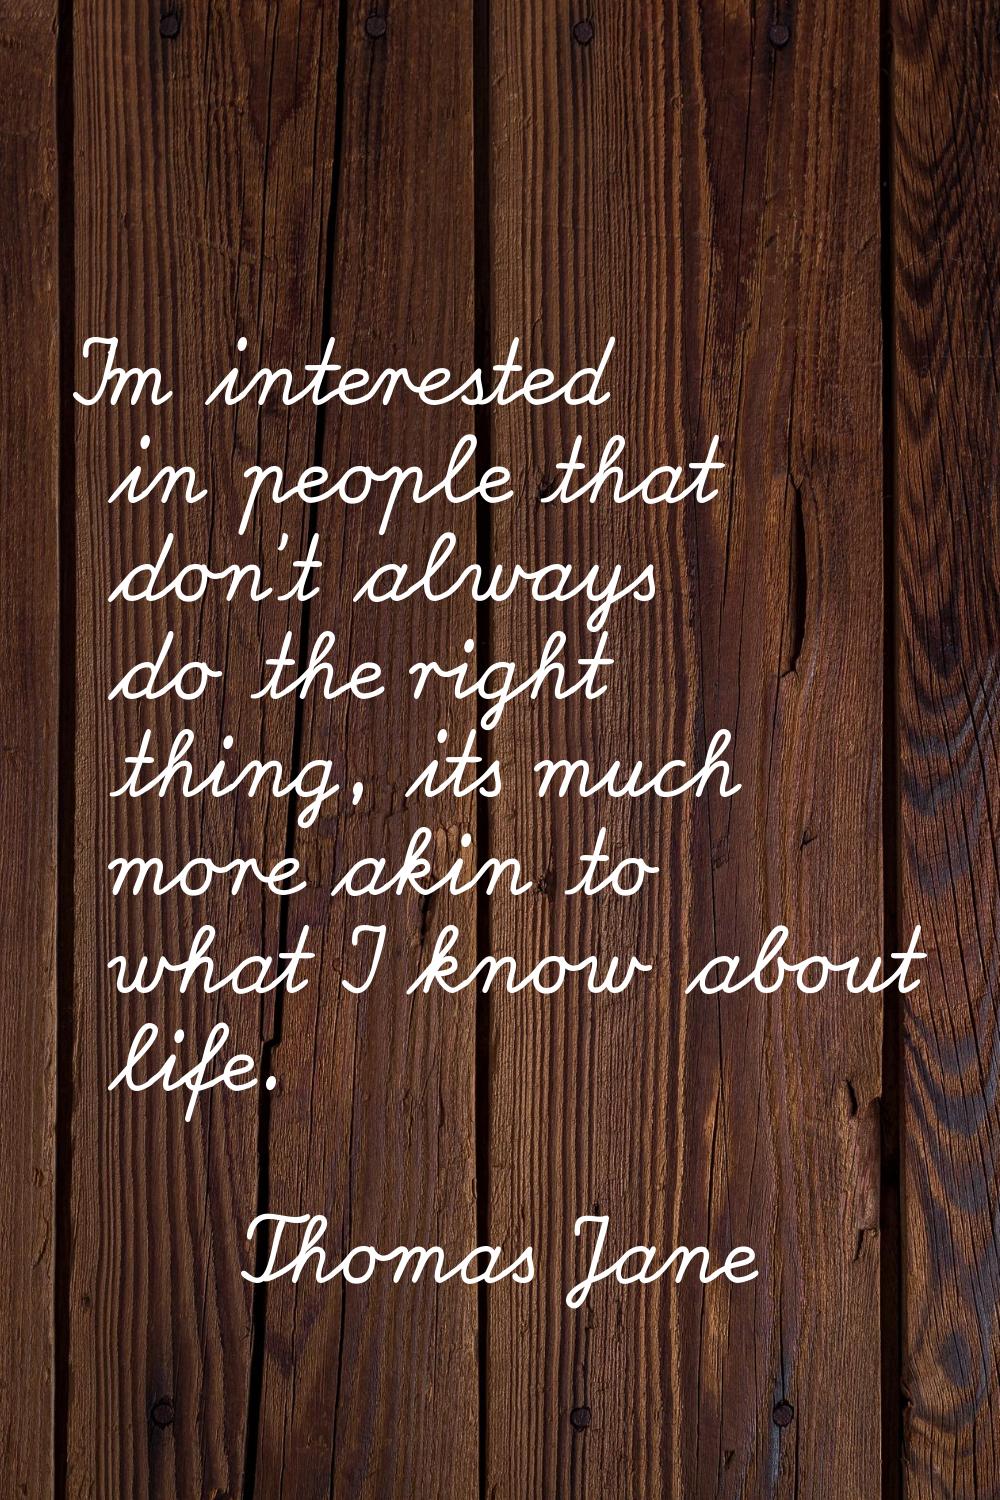 I'm interested in people that don't always do the right thing, its much more akin to what I know ab